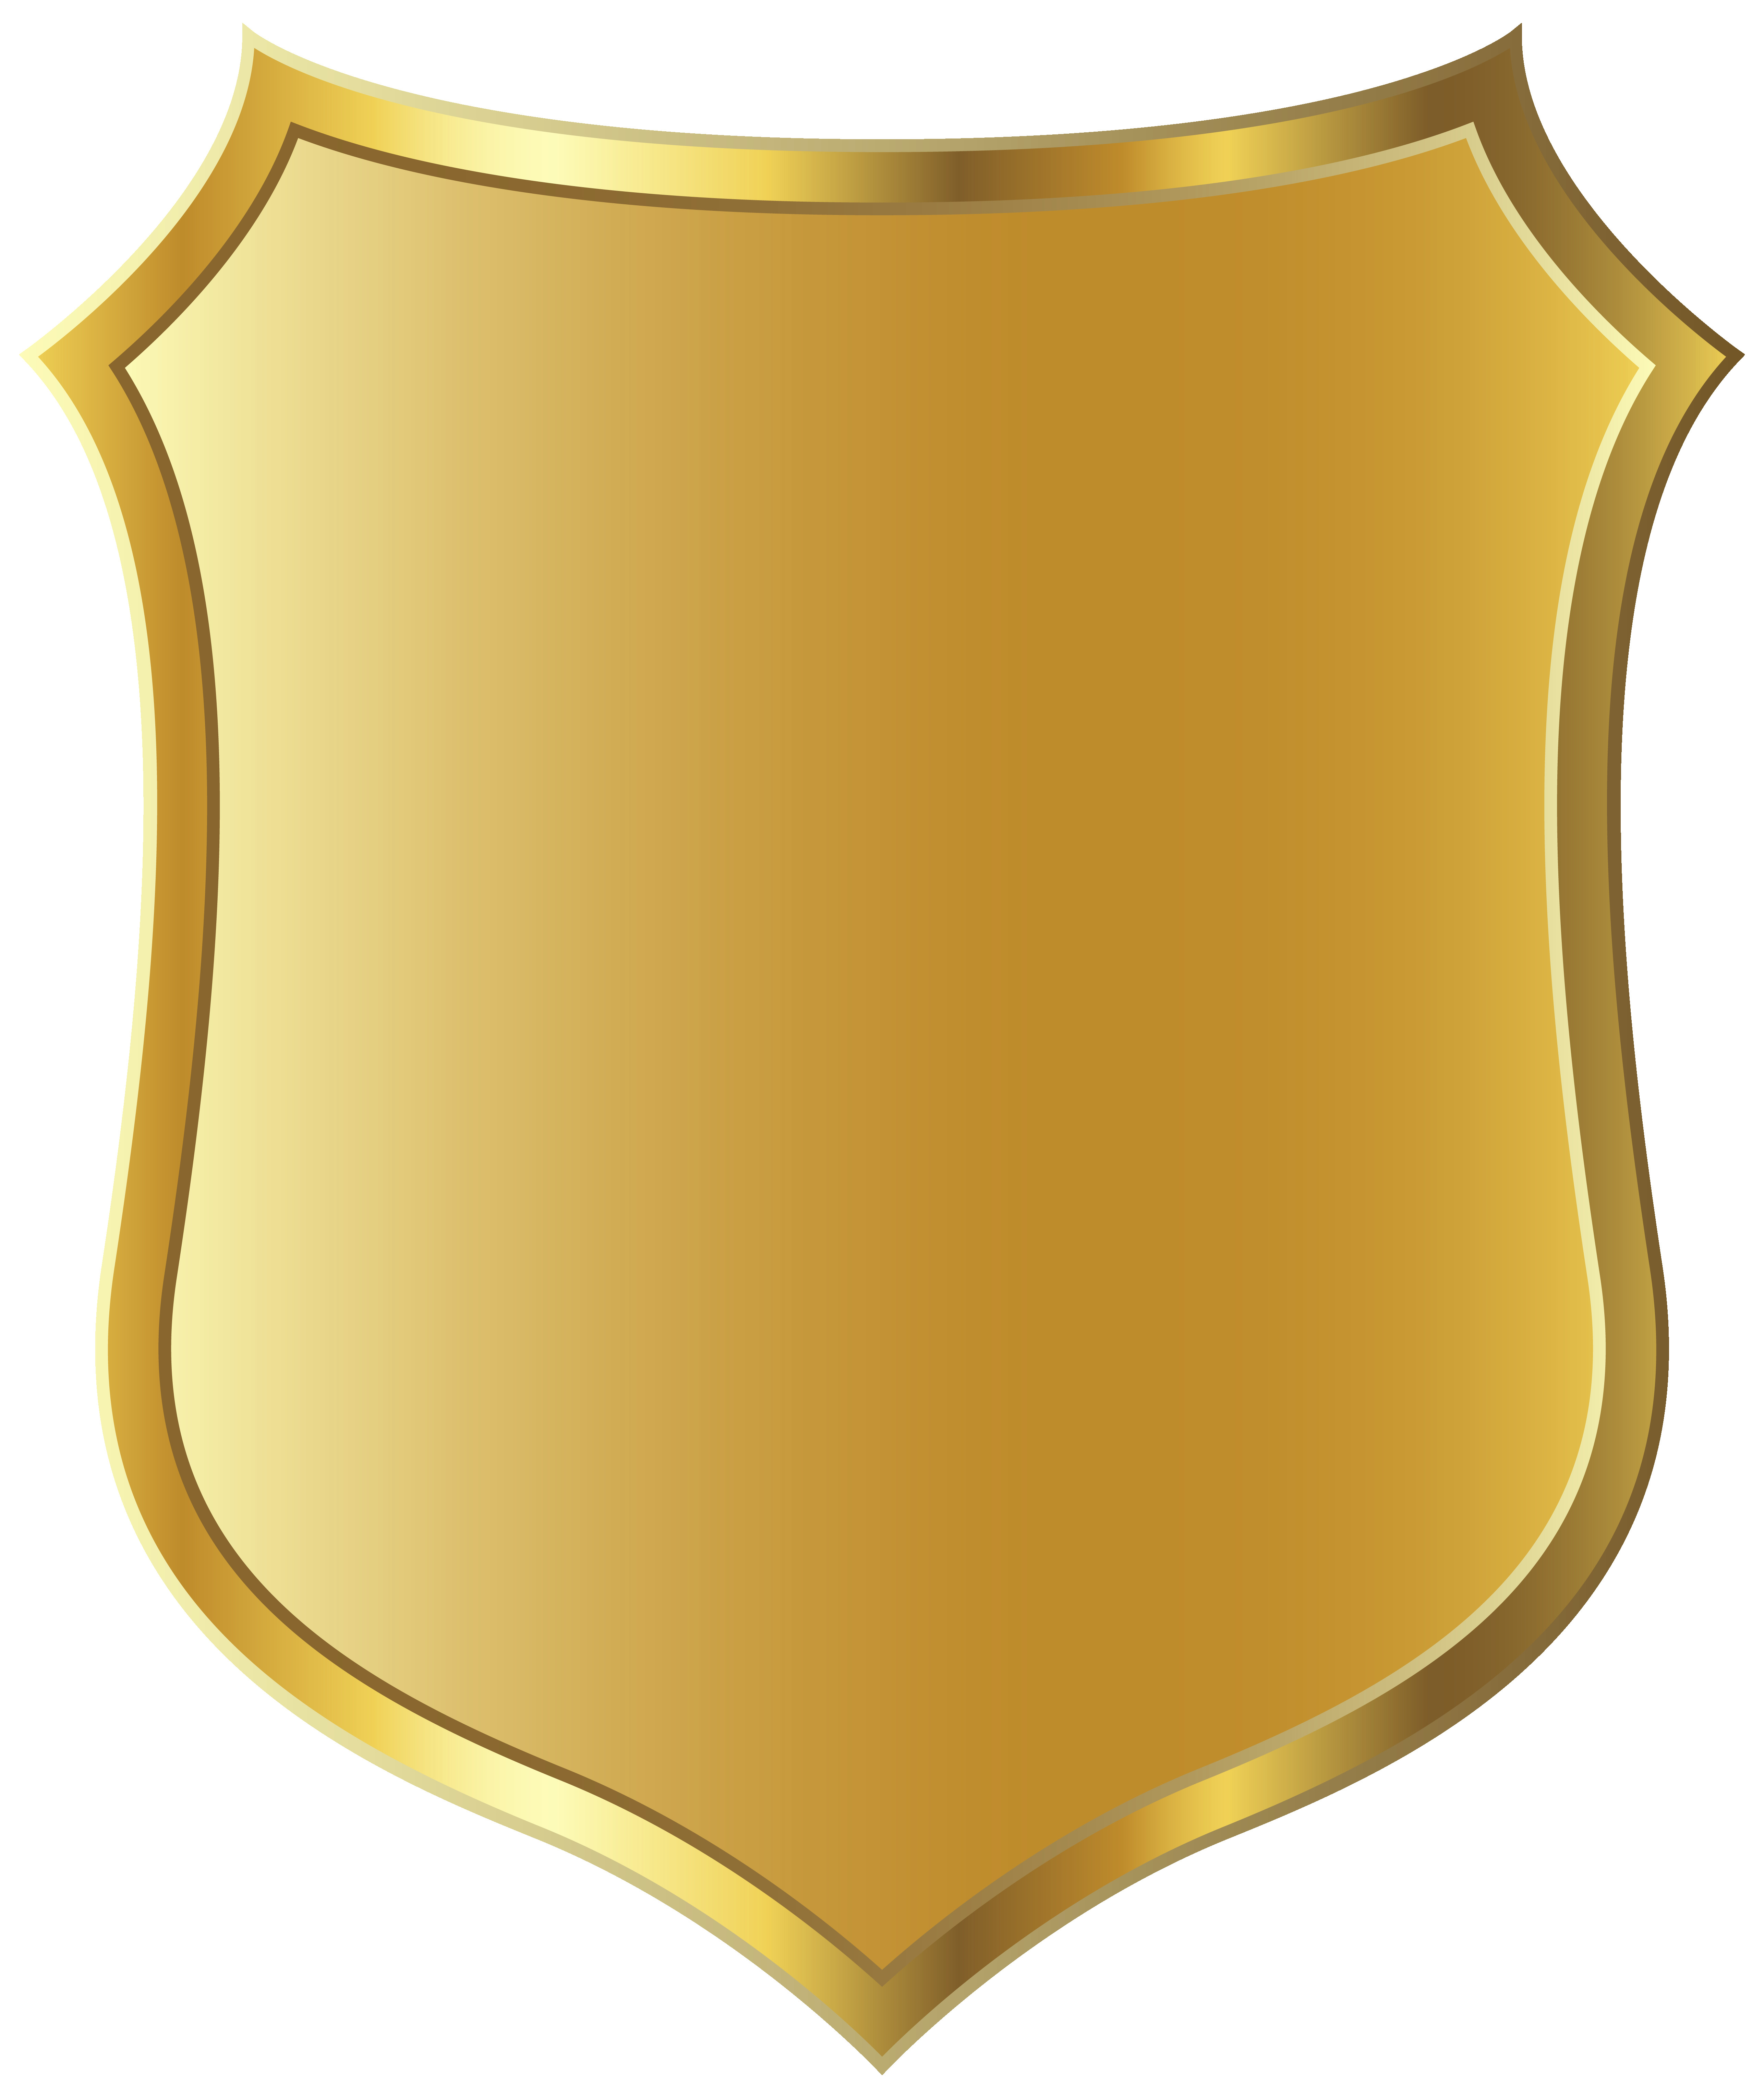 List of Synonyms and Antonyms of the Word Badge